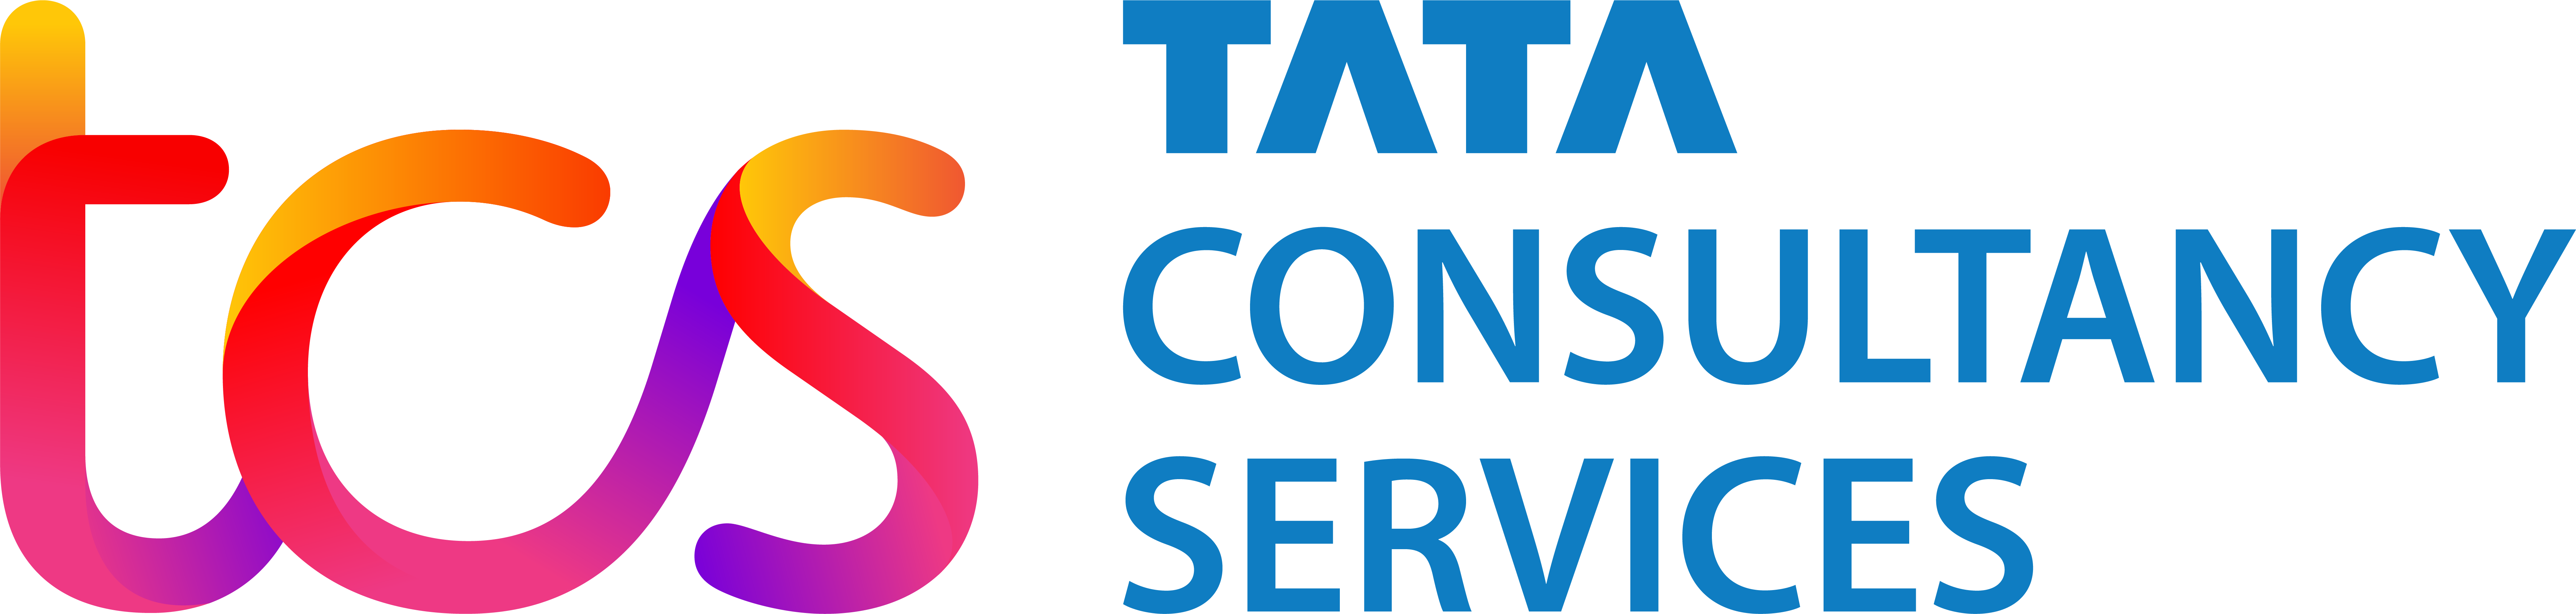 TCS - Tata Consultancy Services Limited logo